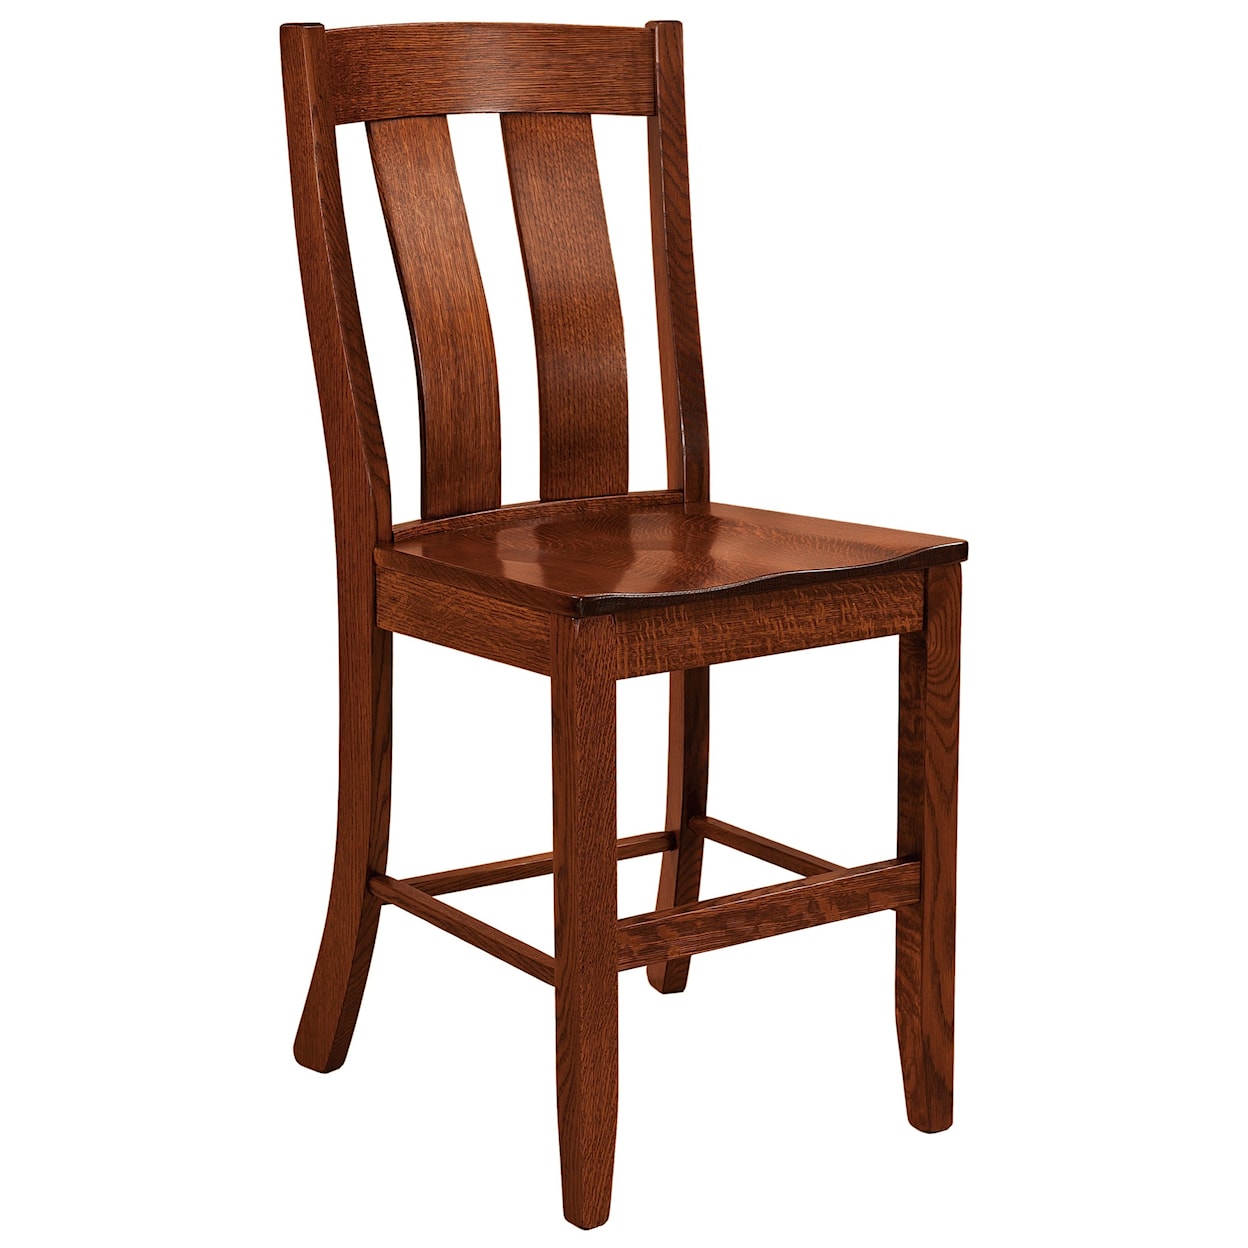 F&N Woodworking Laurie Stationary Bar Stool - Leather Seat